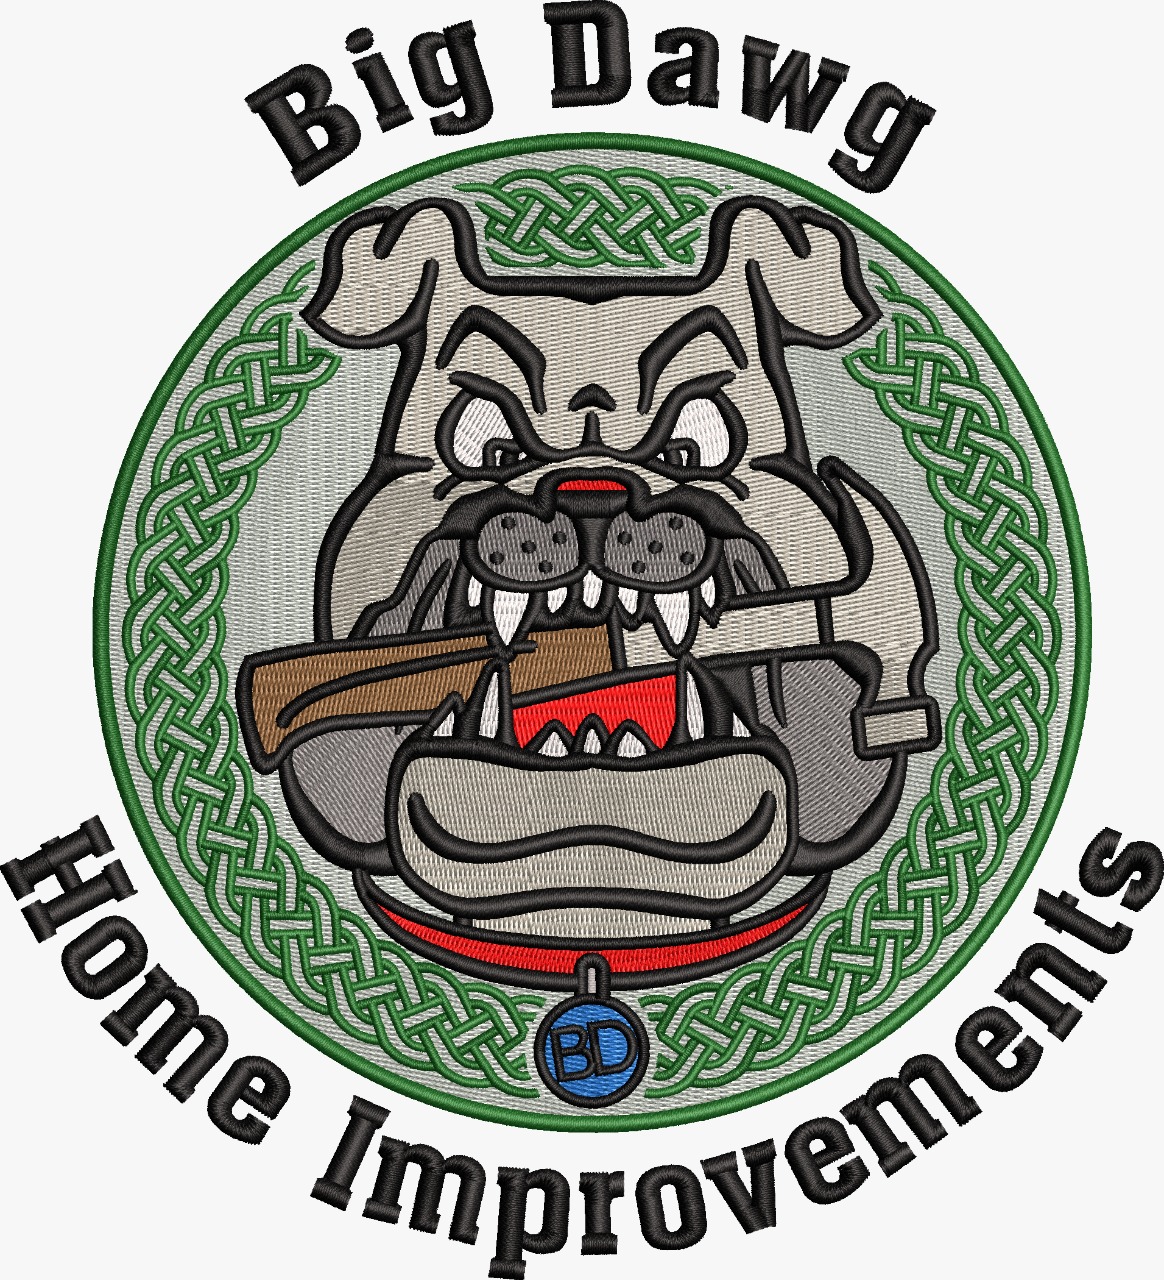 Dawg embroidery design - customer embroidery